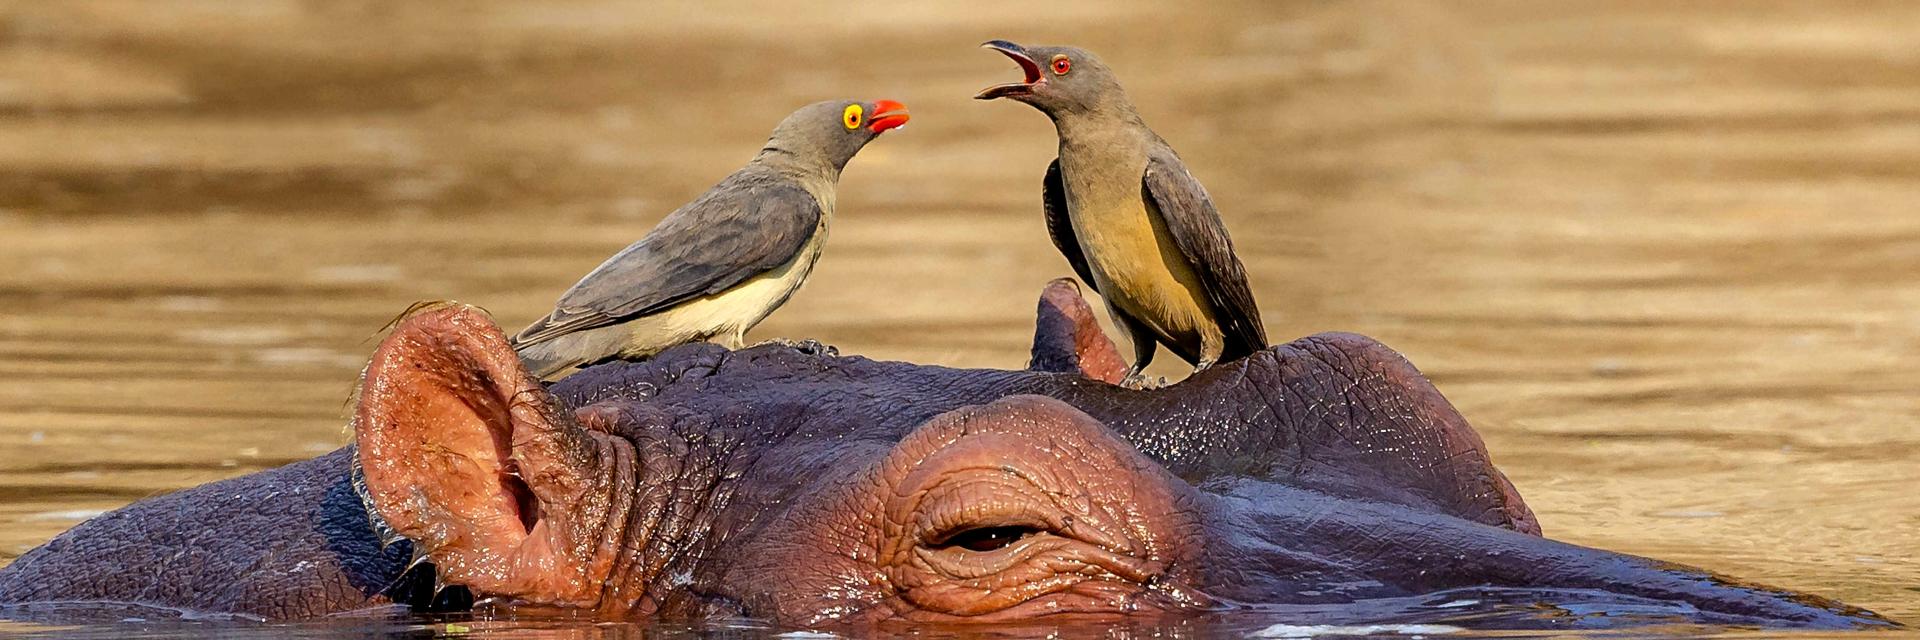 Hippopotamus with Red-bellied oxpeckers on his head.